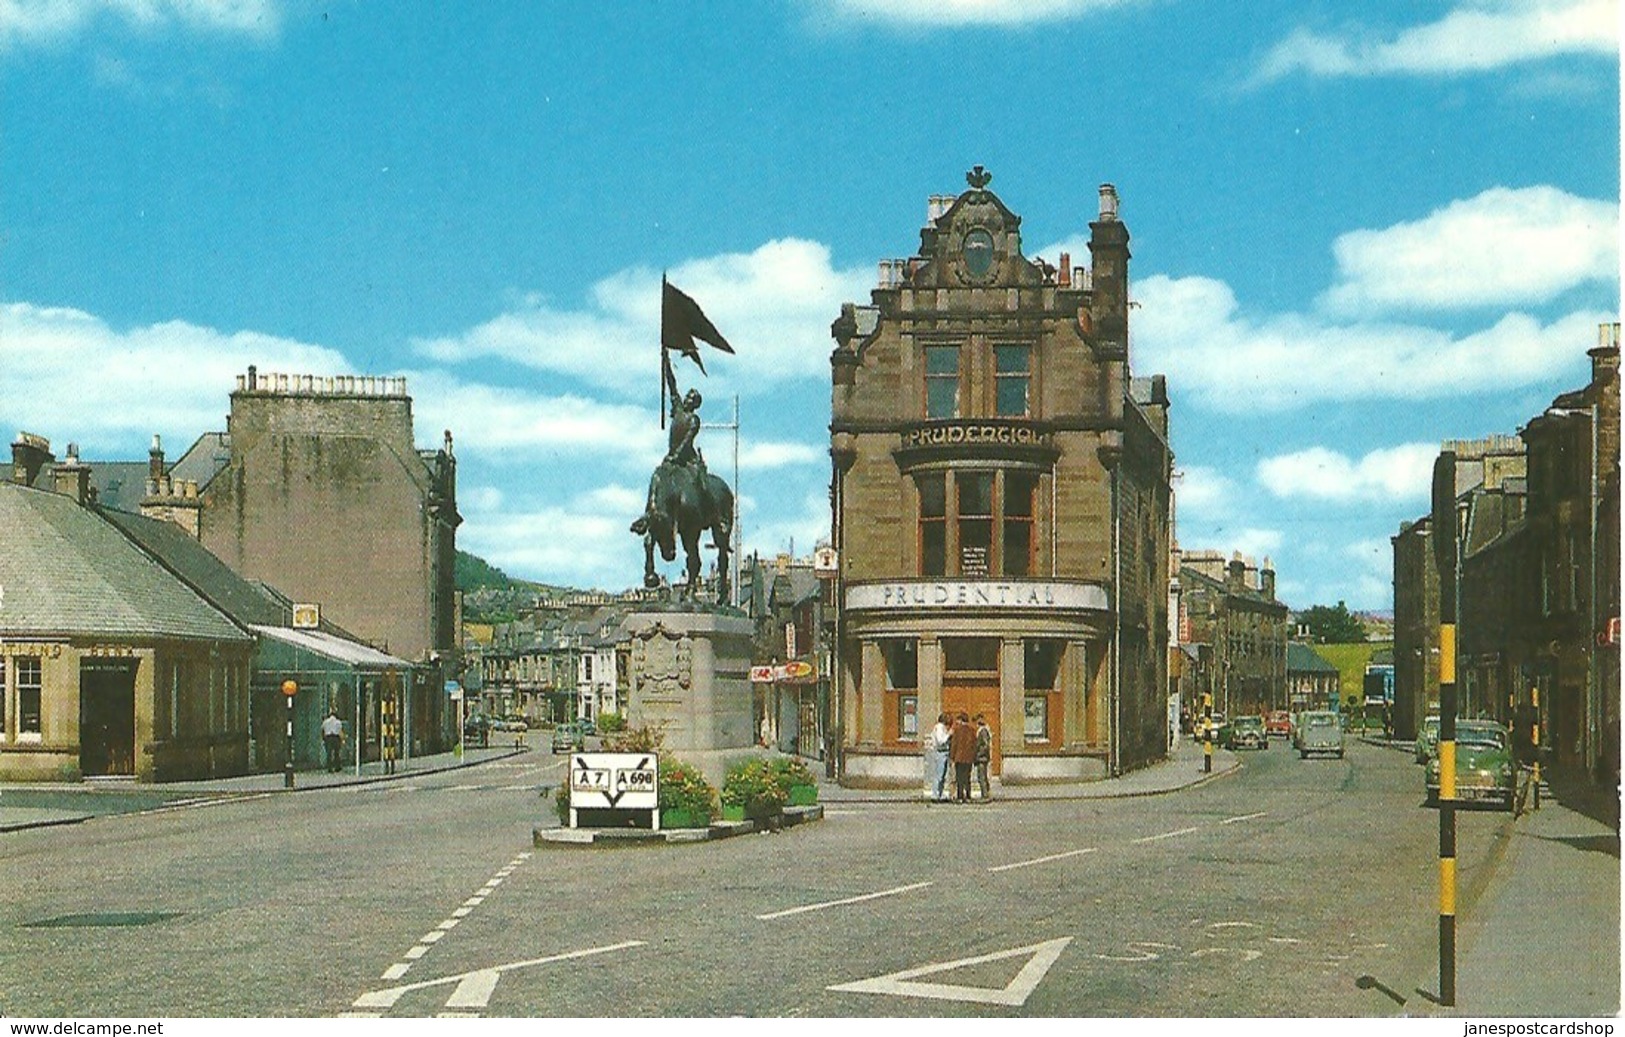 COLOURED POSTCARD HIGH STREET AND THE HORSE MONUMENT - HAWICK - SCOTLAND SHOWING MORRIS MINOR - MINI CAR - SHOPS - Selkirkshire